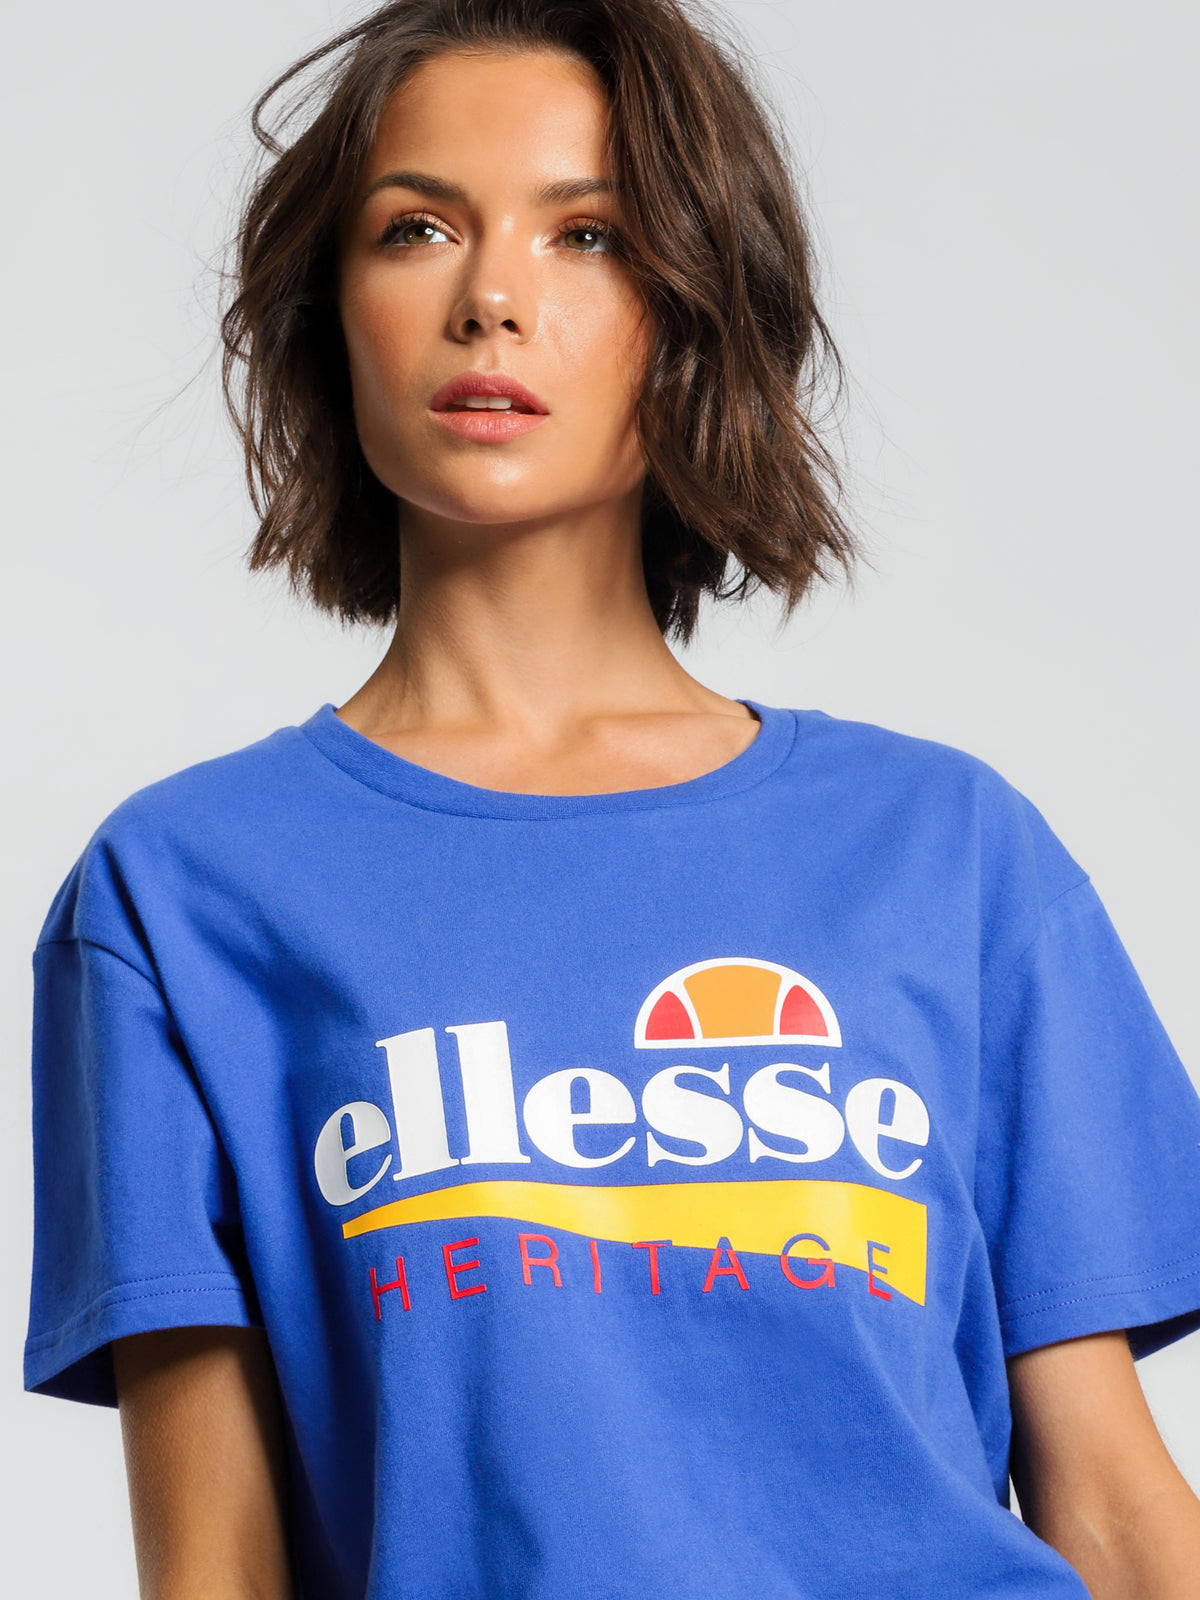 Trena T-Shirt in Blue